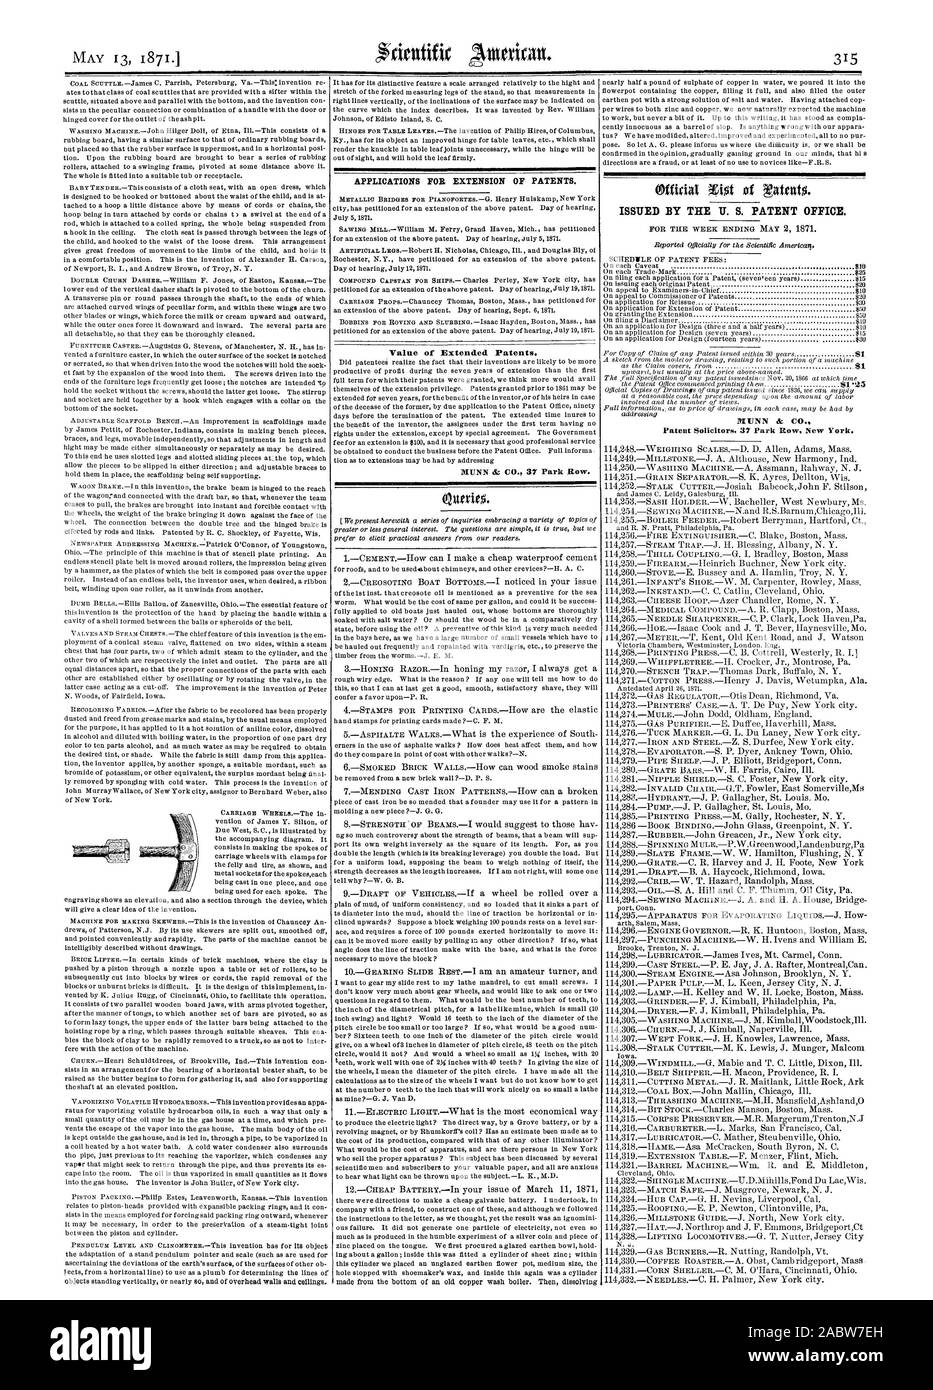 APPLICATIONS FOR EXTENSION OF PATENTS Value of Extended Patents. ISSUED BY THE U. S. PATENT OFFICE. rUNN & C Patent Solicitors 37 Park Row New York., scientific american, 1871-05-13 Stock Photo